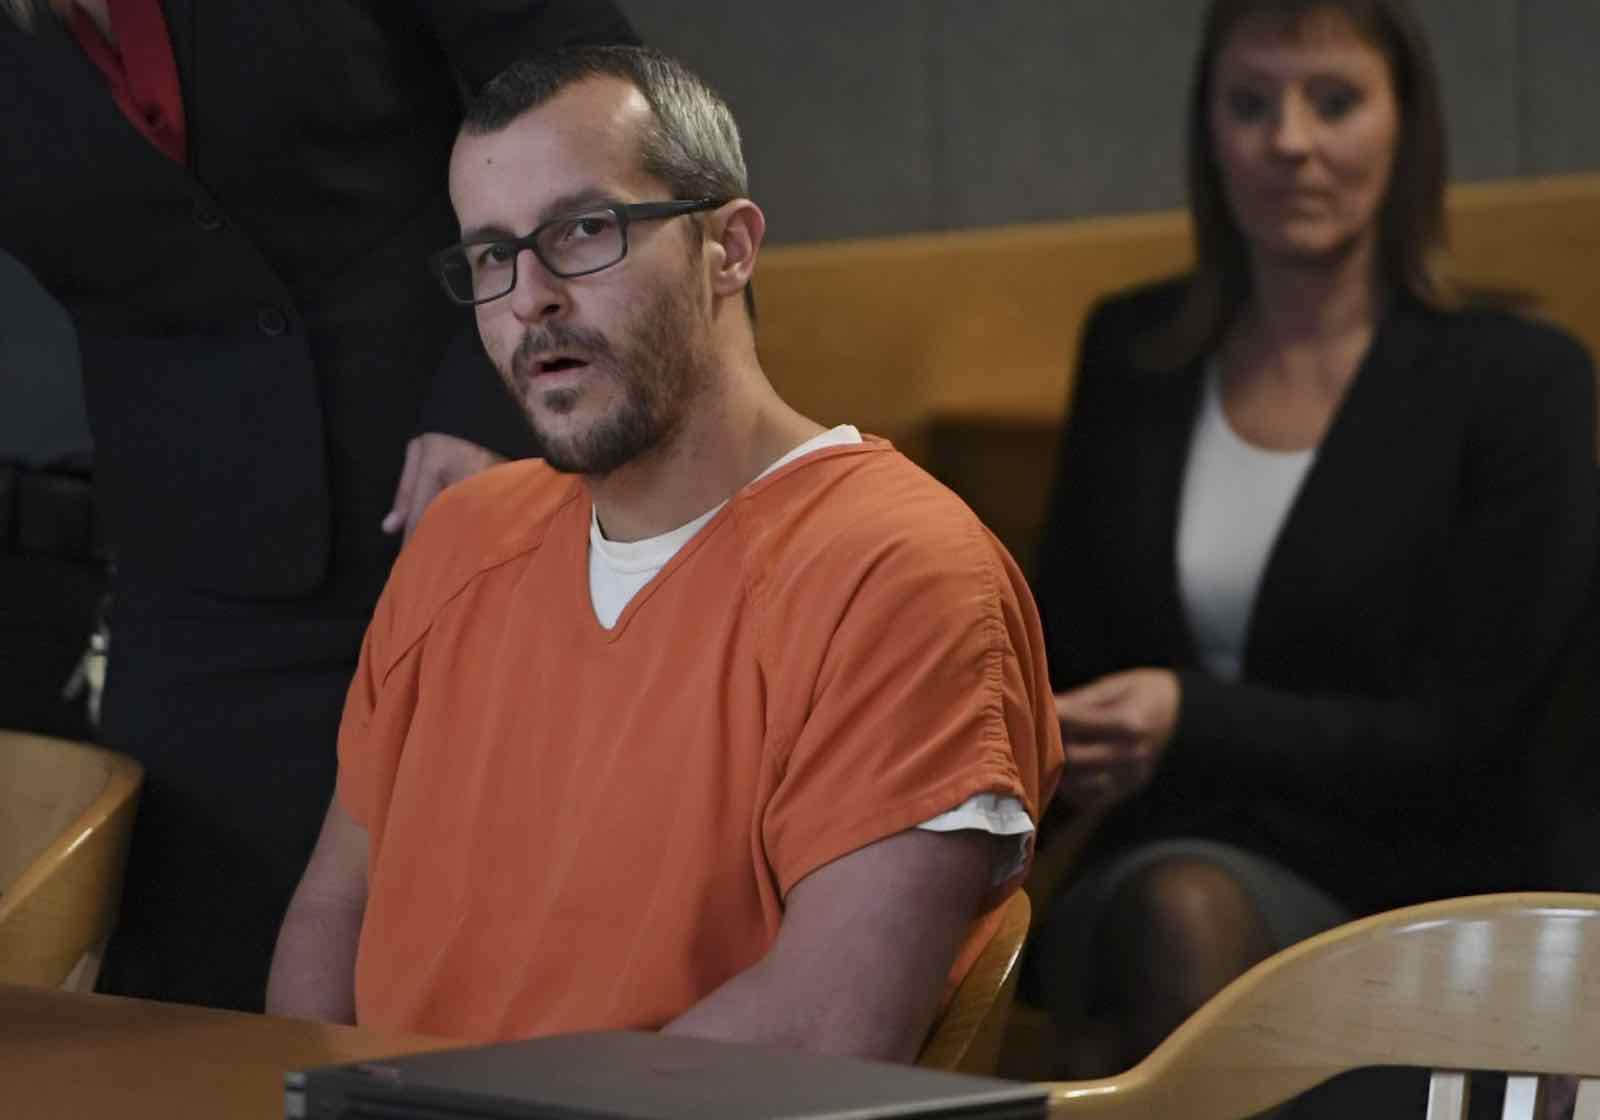 Before he killed his pregnant wife Shanann, Chris Watts was telling her lie after lie to trick her into thinking he was happy.